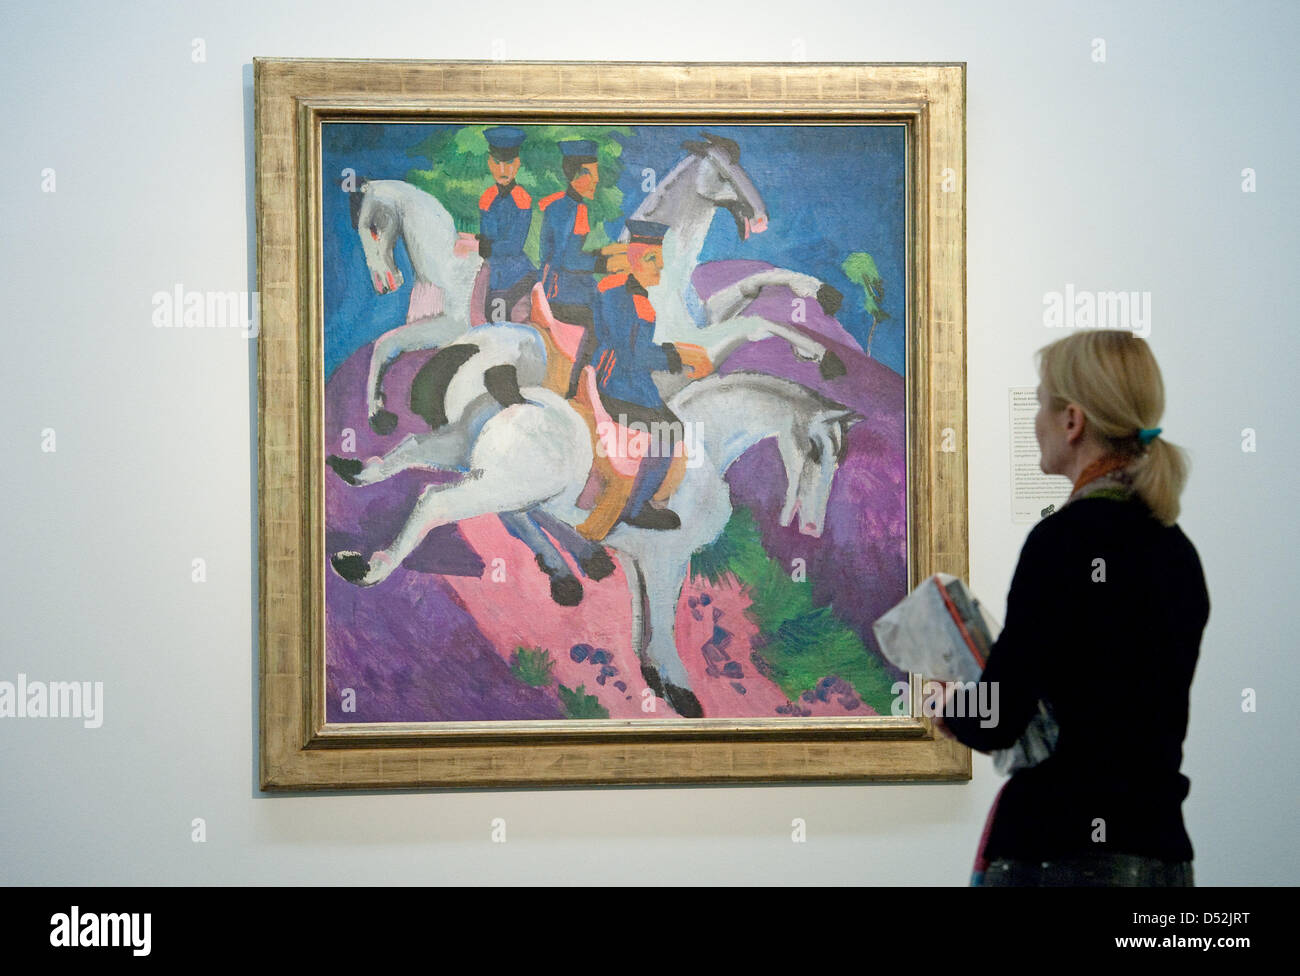 A woman looks at the painting 'Riding Artillerymen' by artist Ernst Ludwig Kirchner in the exhibition 'Bruecke Bauhaus Blaue Reiter - Treasures from the Max Fischer Collection' at the 'Staatsgalerie' ('State Gallery') in Stuttgart, Germany, 04 March 2010. The exhibition is open from 05 March to 20 June 2010 and features about 180 works of art from the private collection of the entr Stock Photo